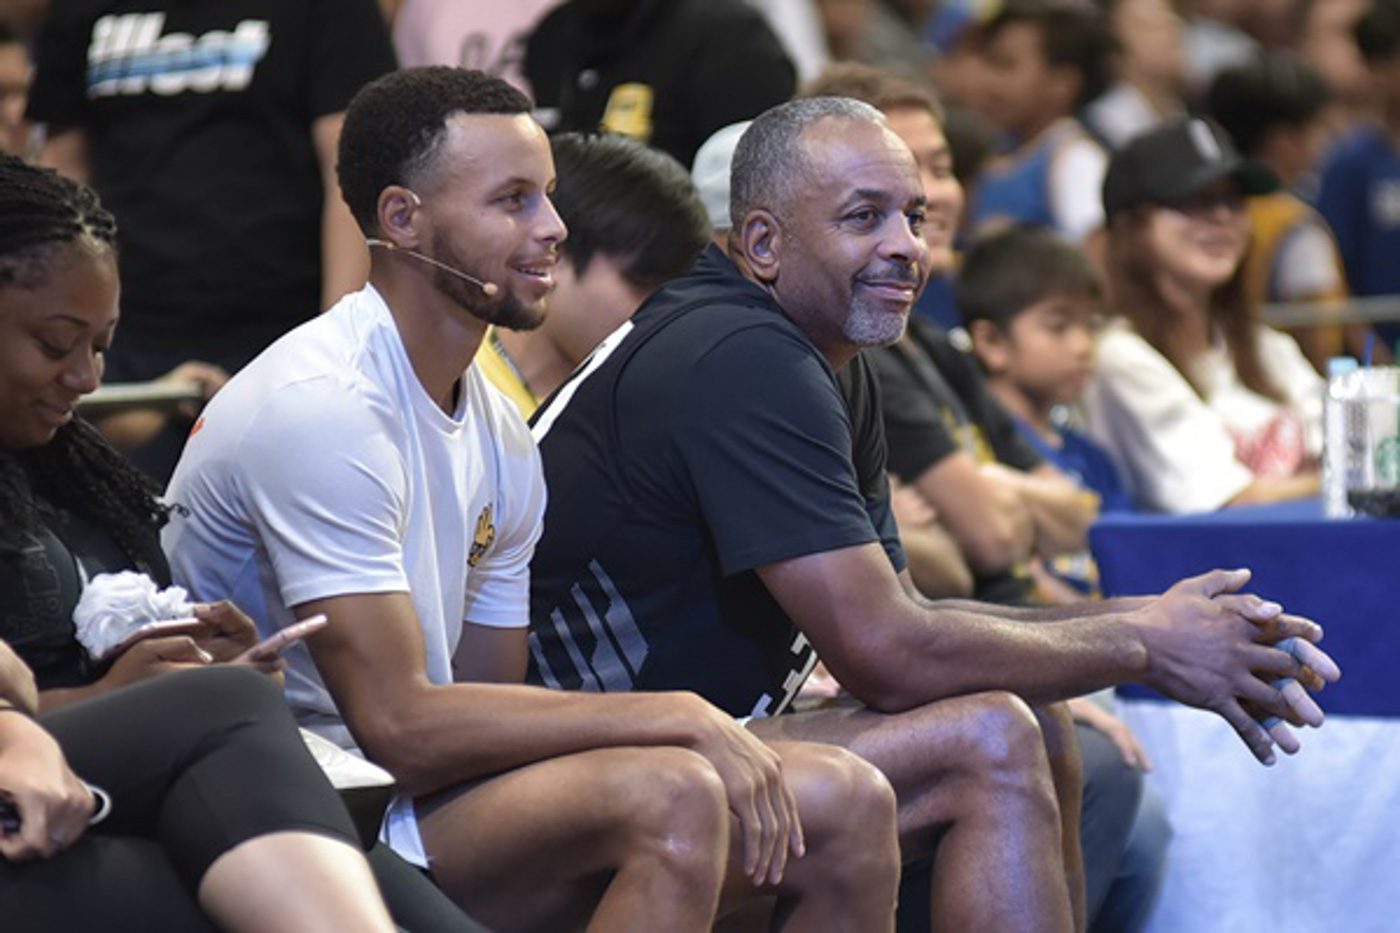 Dell Curry didn’t let Steph shoot 3s as a kid. Here’s why